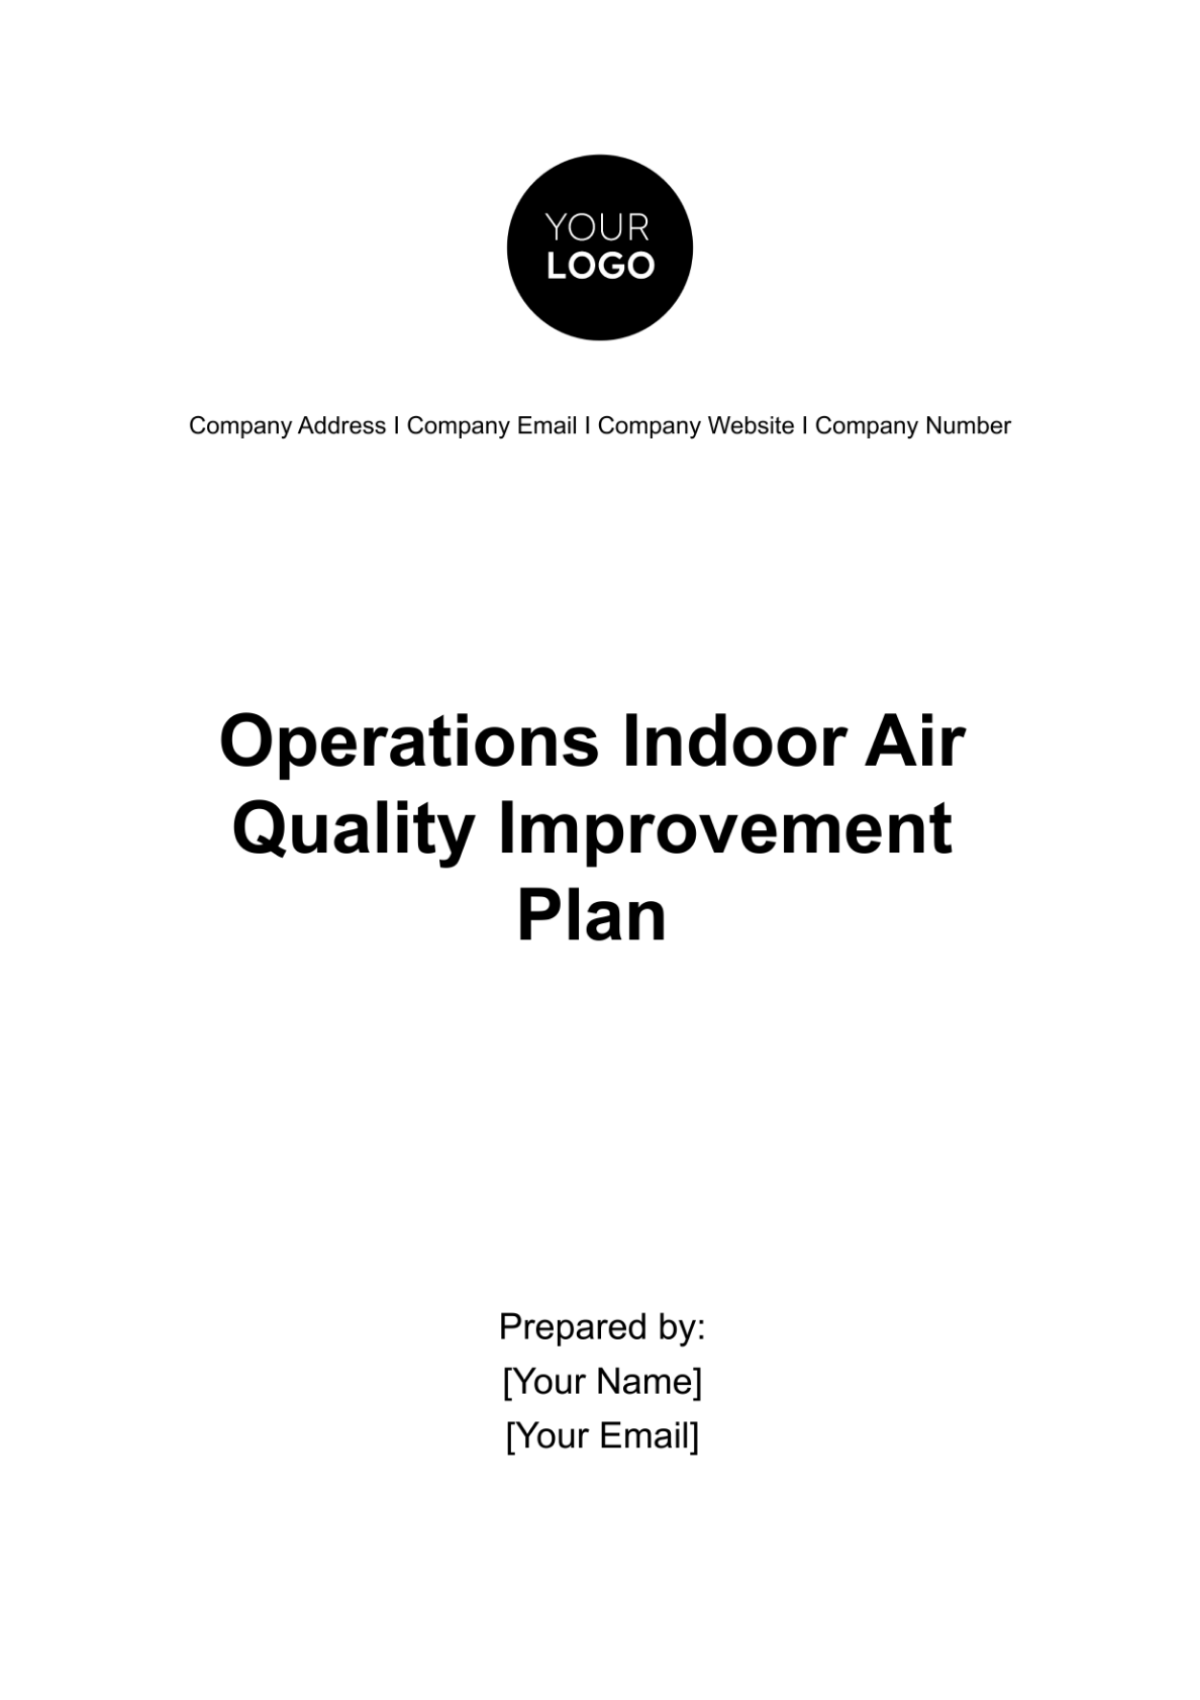 Operations Indoor Air Quality Improvement Plan Template